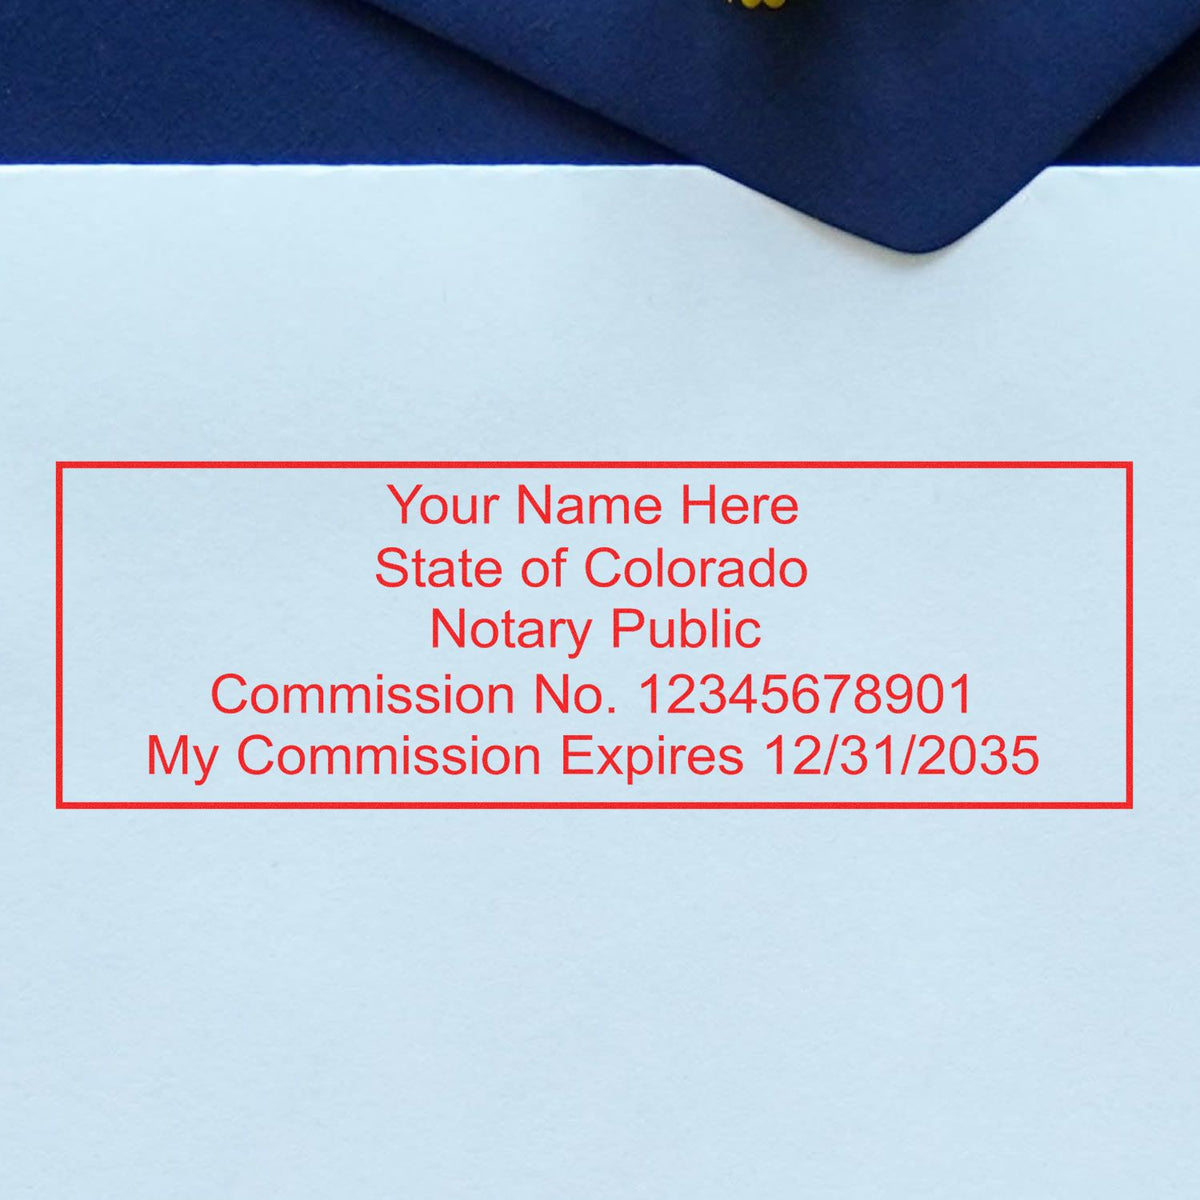 Another Example of a stamped impression of the Super Slim Colorado Notary Public Stamp on a piece of office paper.